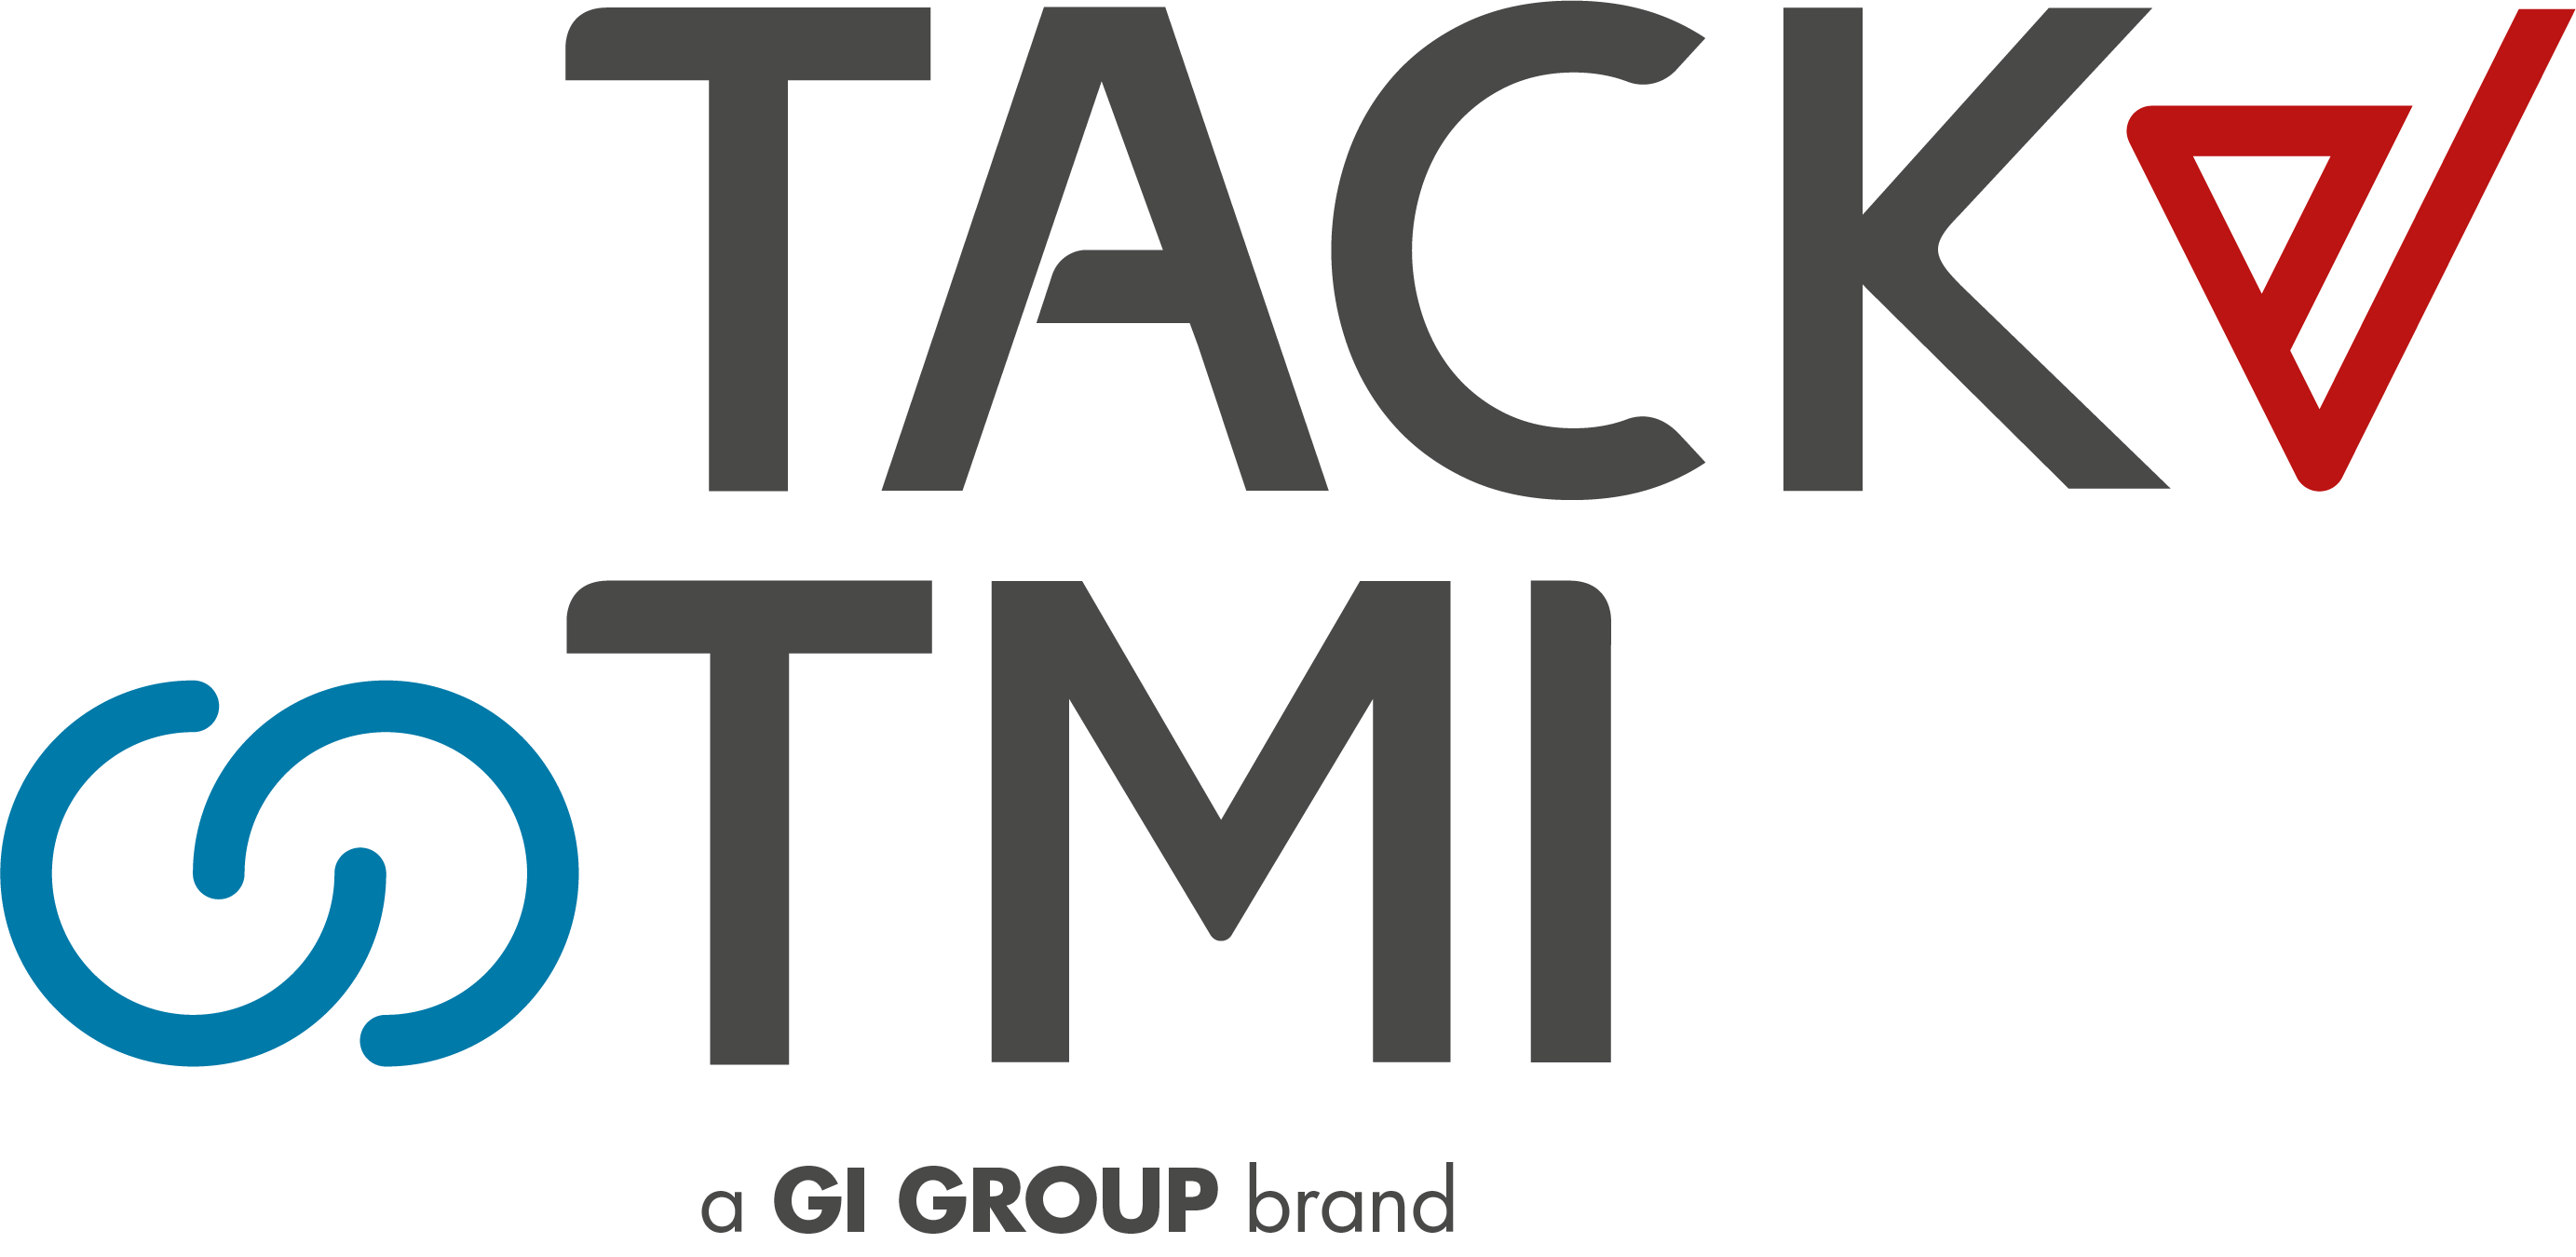 Tack TMI training & consulting brand of Gi Group company